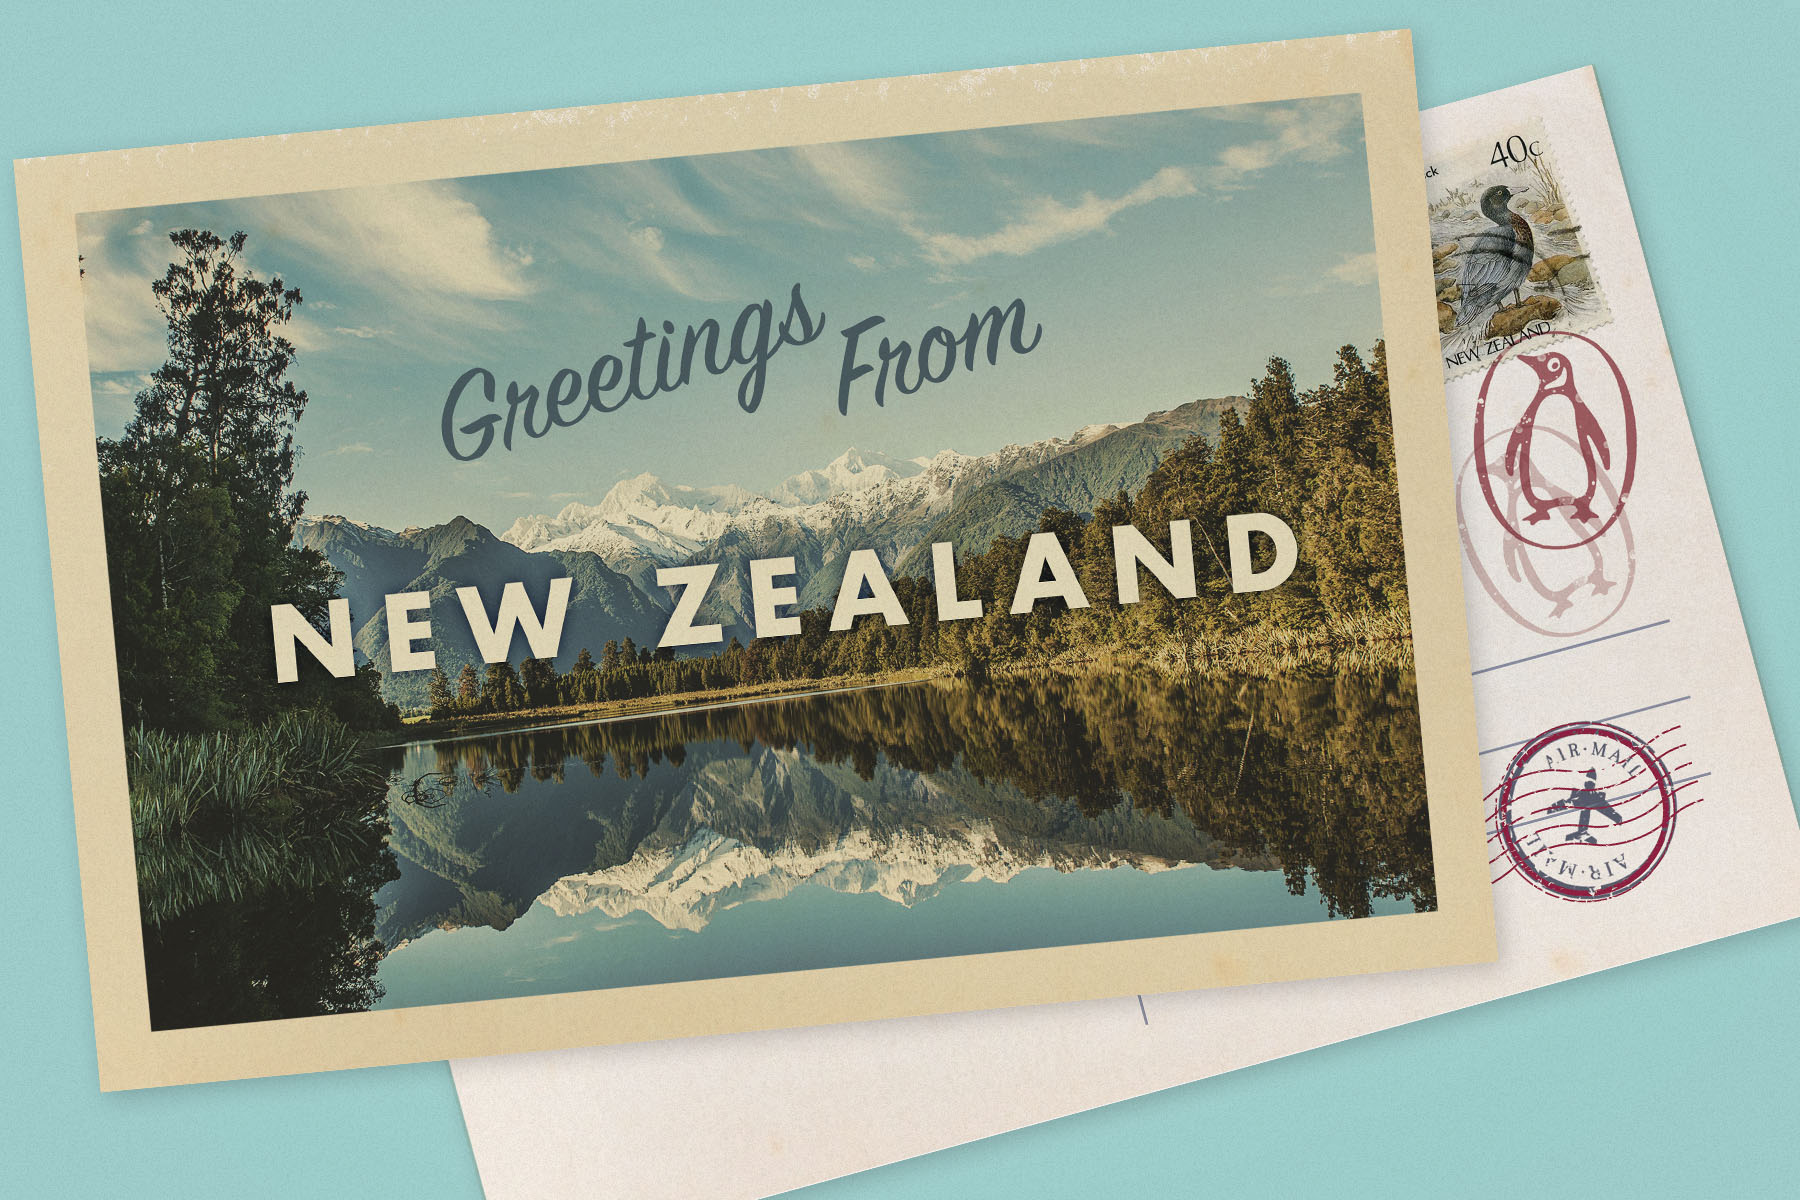 Travel to New Zealand with these five books.